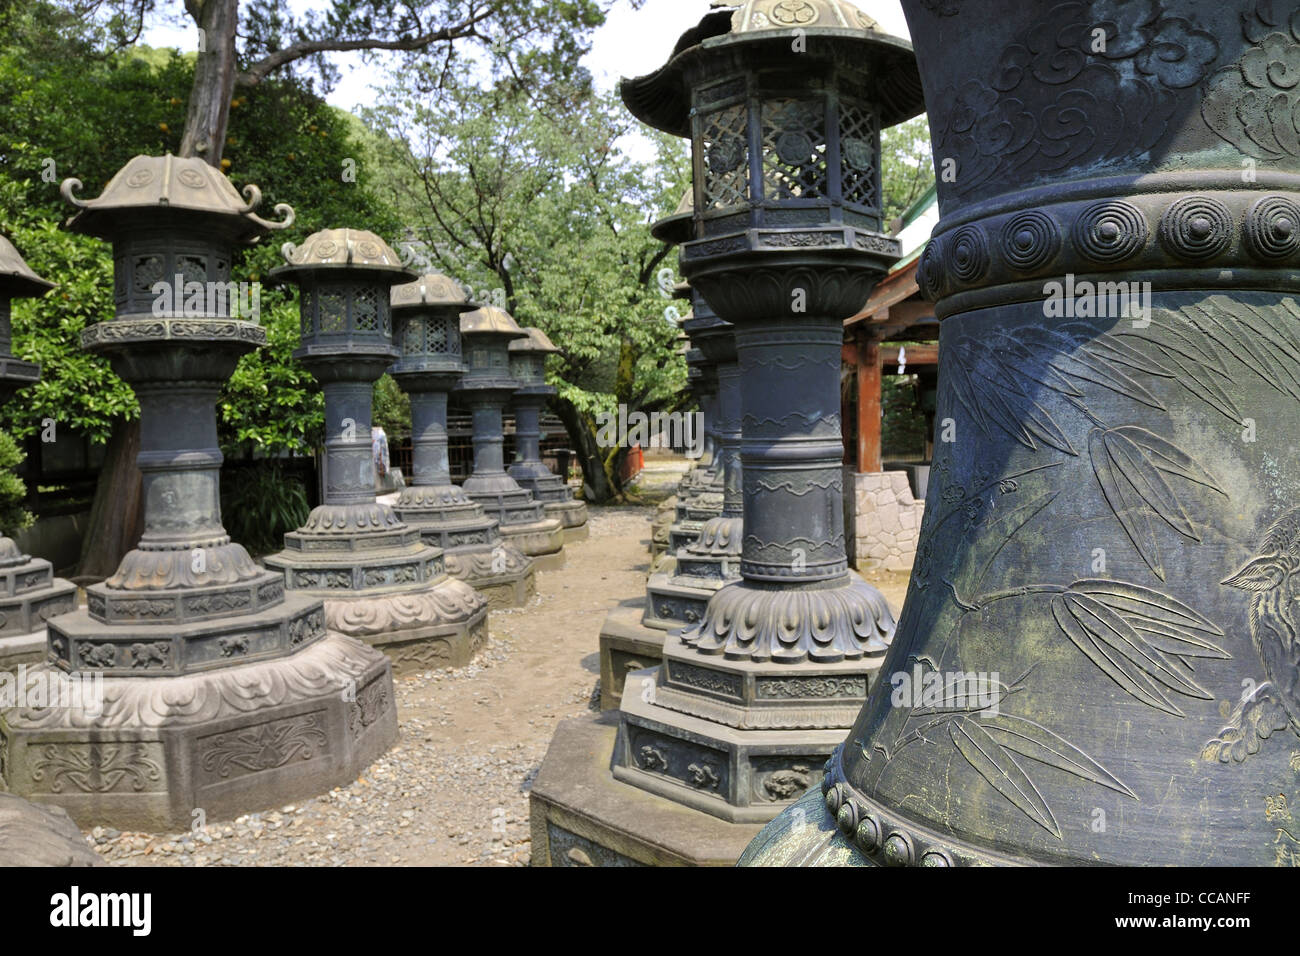 Rows of Japanese traditional stone lanterns in Tokyo Ueno park; focus on front lantern Stock Photo